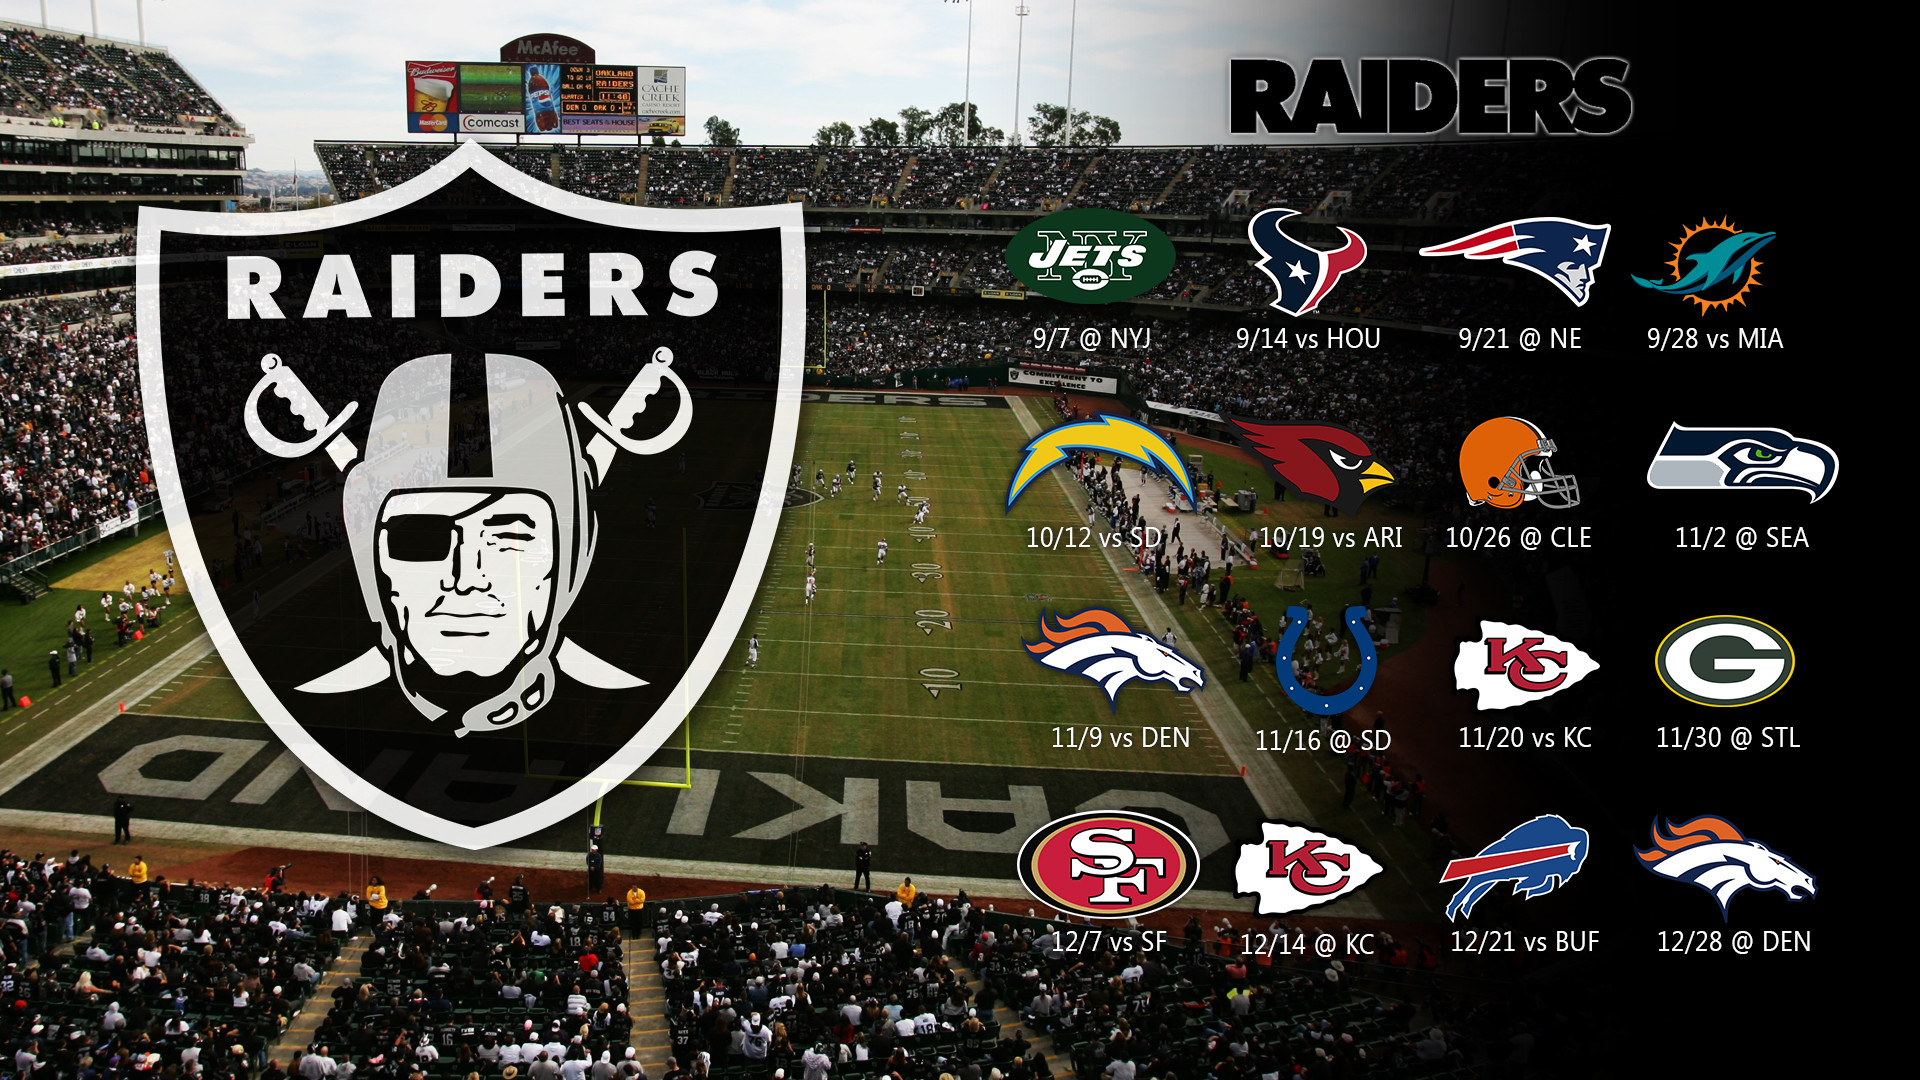 Free download Raiders Schedule 2014 Oakland raiders [1920x1080] for